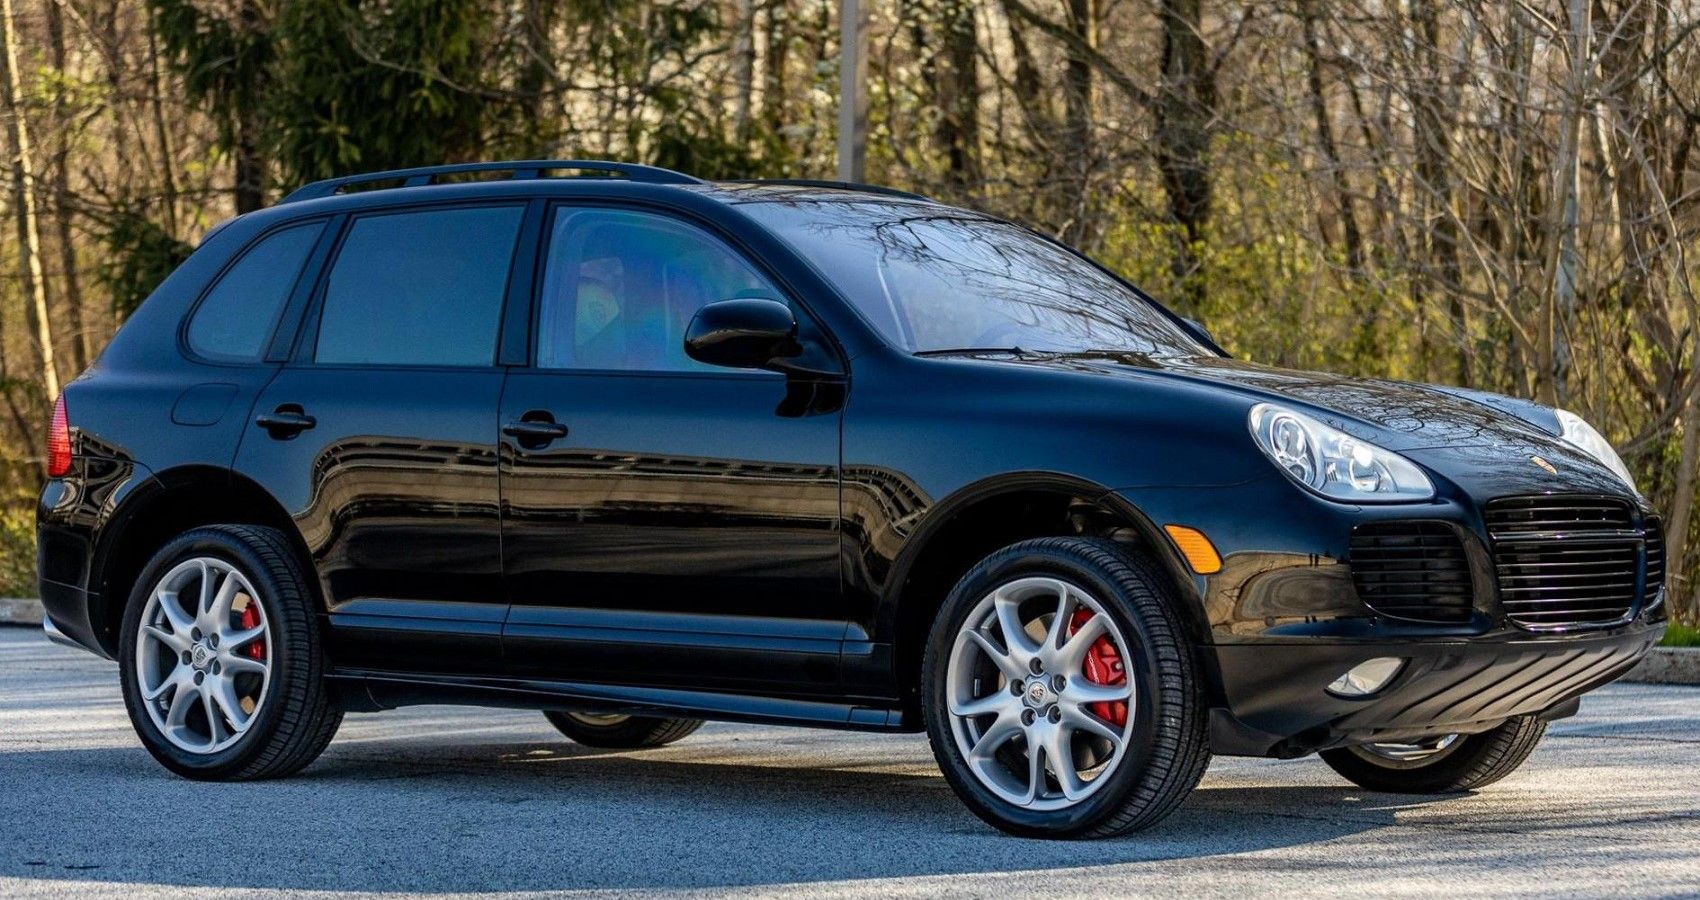 The $136,000 Porsche Cayenne Turbo is a staggeringly good luxury